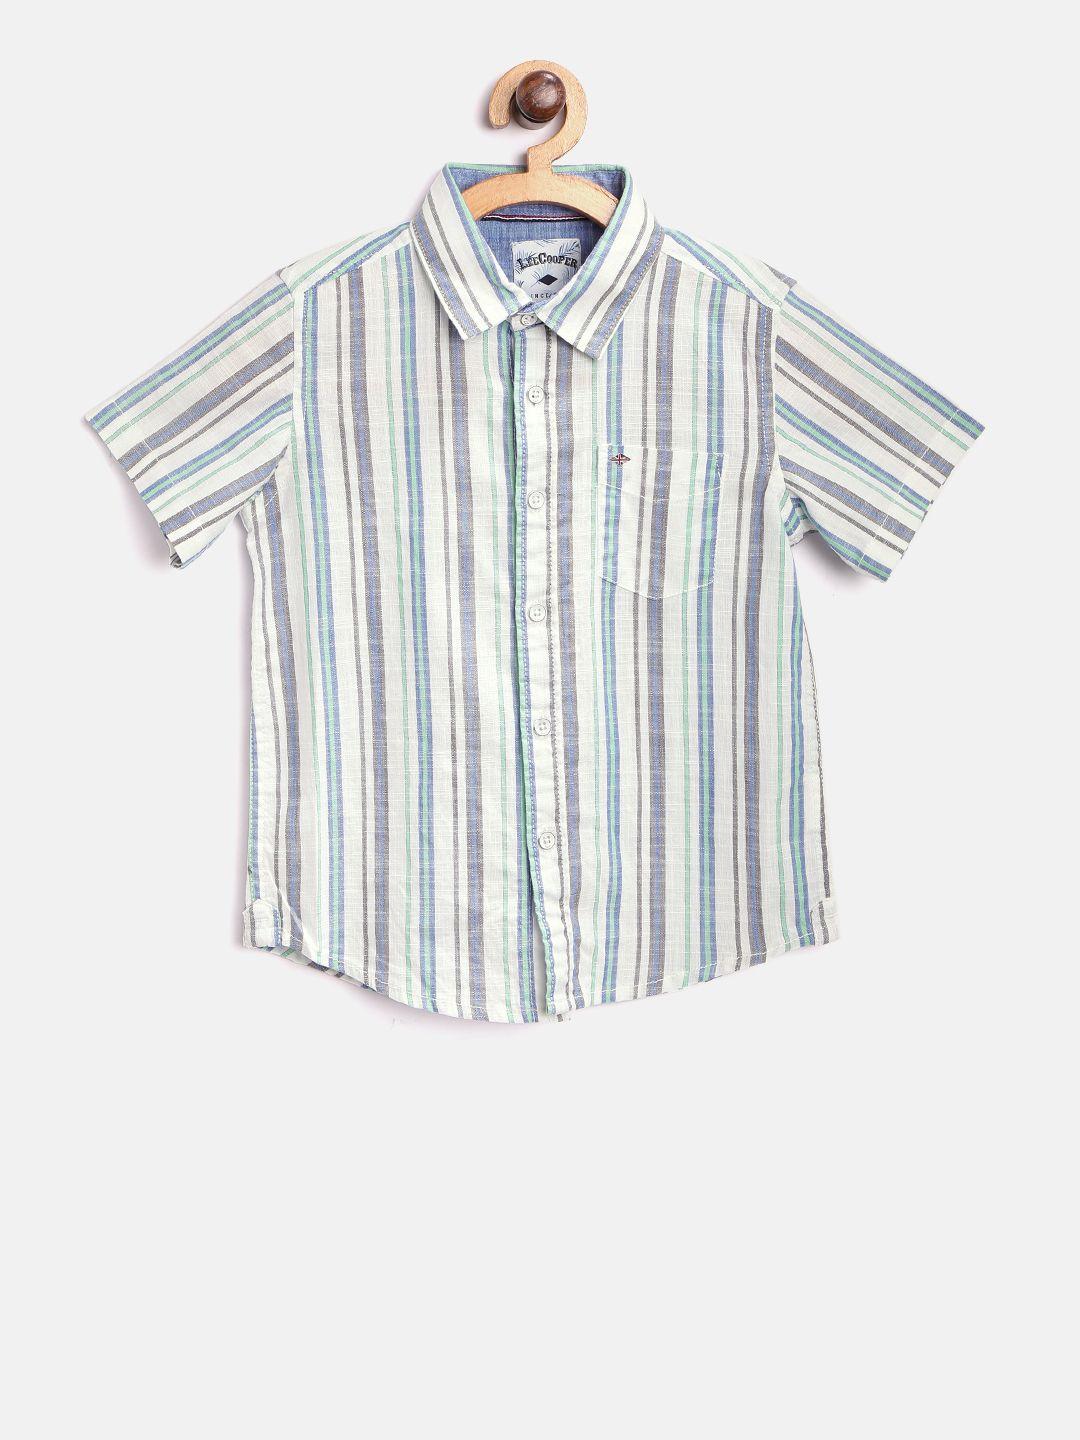 lee cooper boys white & blue regular fit striped casual shirt